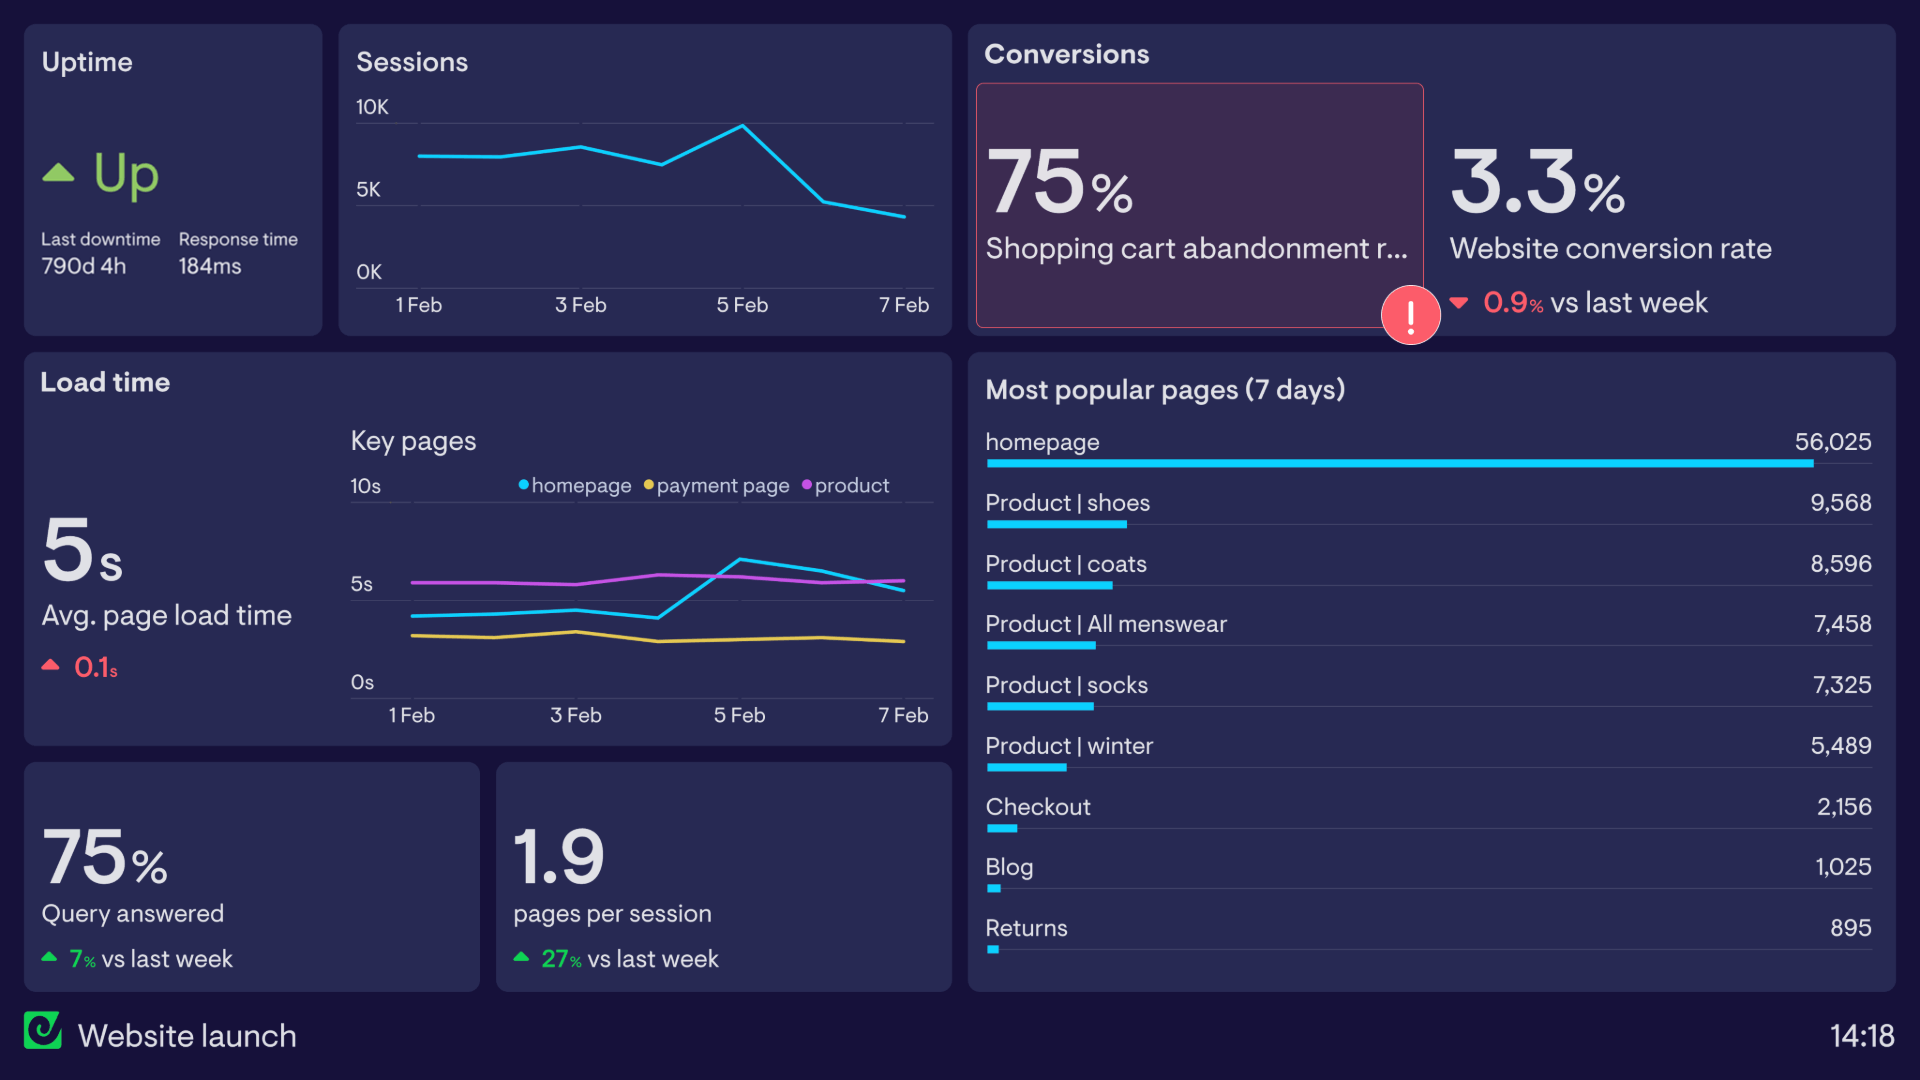 Example of a dashboard used by a marketing team for the launch of their new website